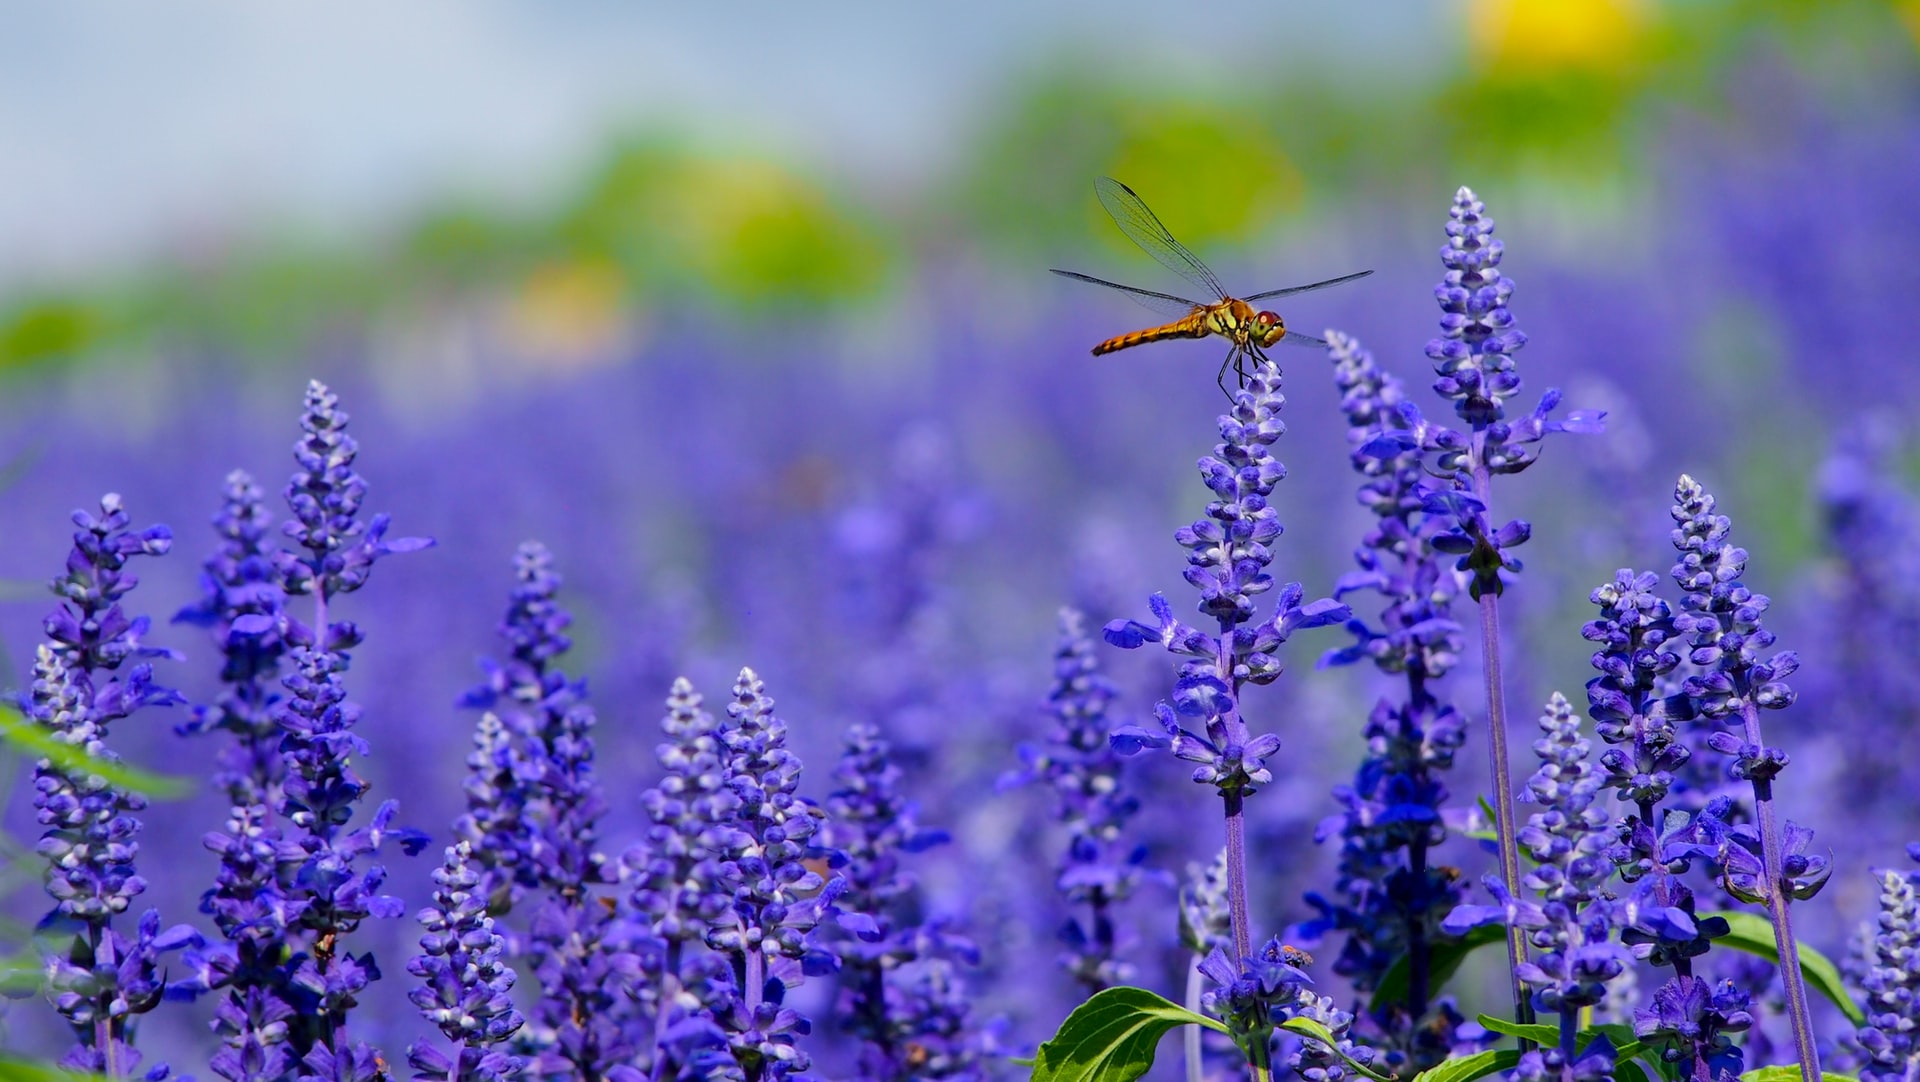 Dragonfly on a lavender flower